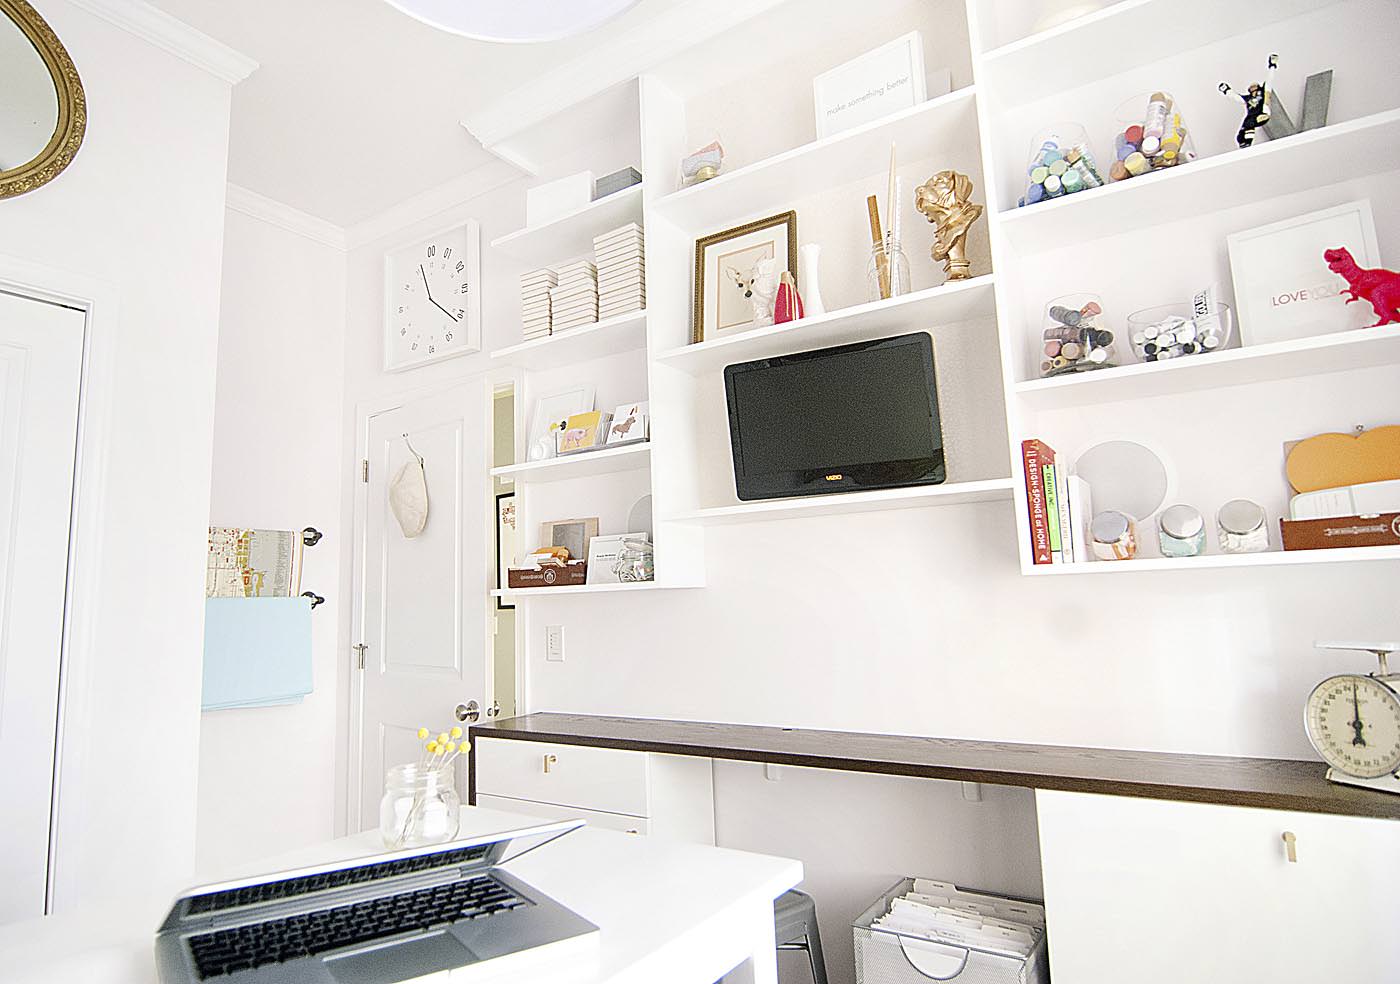 A light colored studio office space with custom built-in shelves and a high work table. 